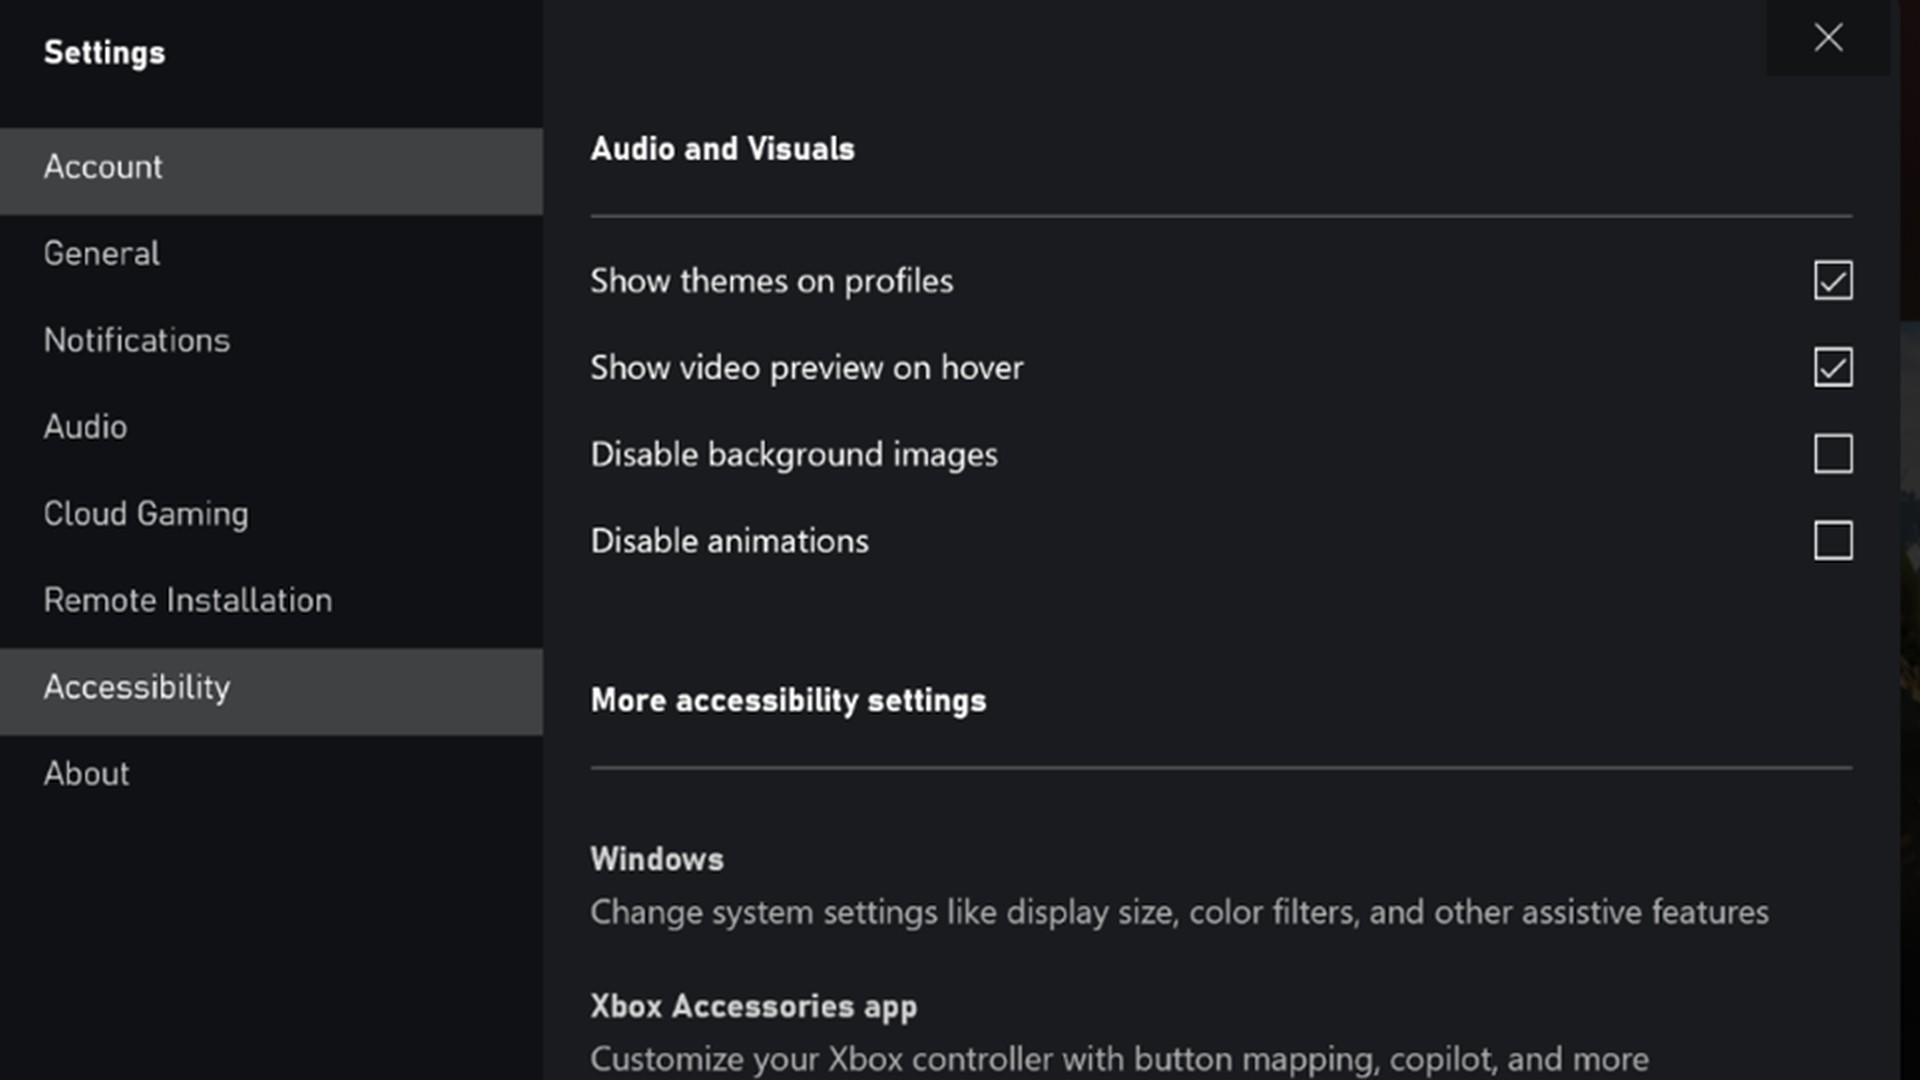 A screenshot of the new Xbox App on PC accessibility settings menu, depicting the ability to Disable background images and Disable animations.